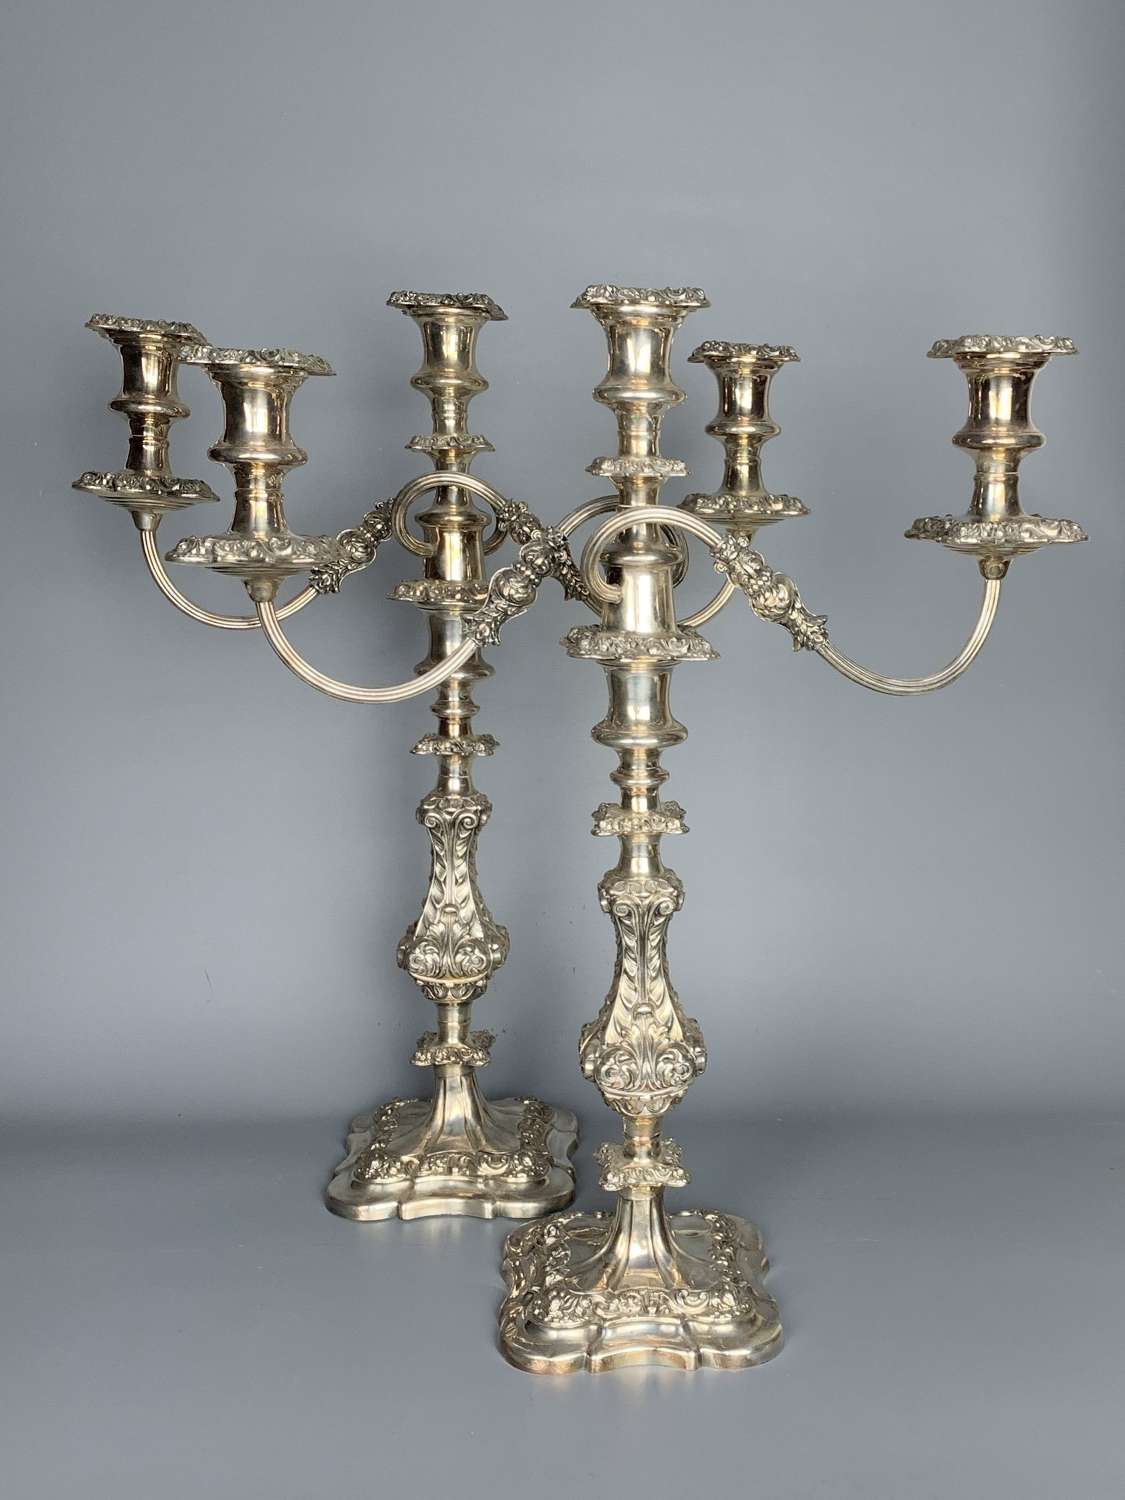 Pair of 19th Century Old Sheffield Plate Candelabra / Candlesticks